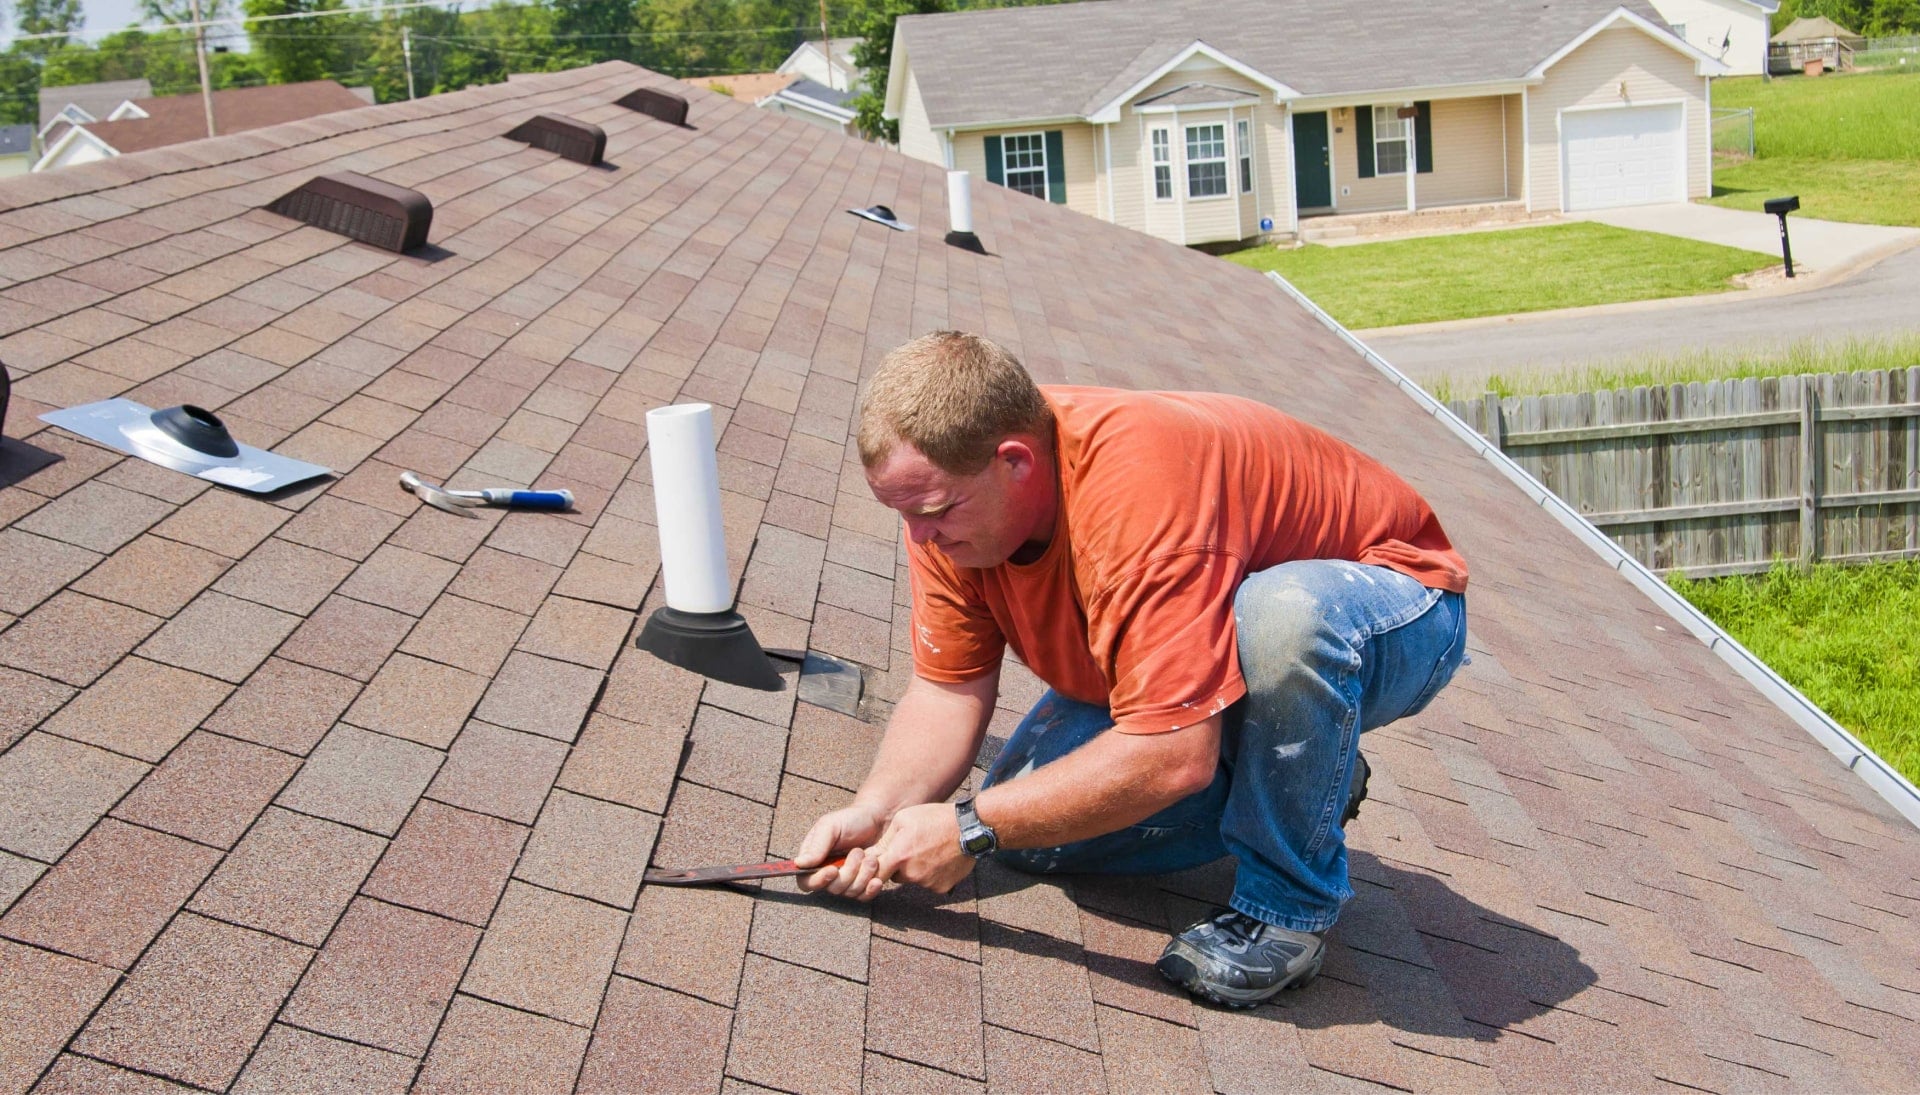 Dependable Roof and shingle repair experts in Columbia, committed to customer satisfaction.